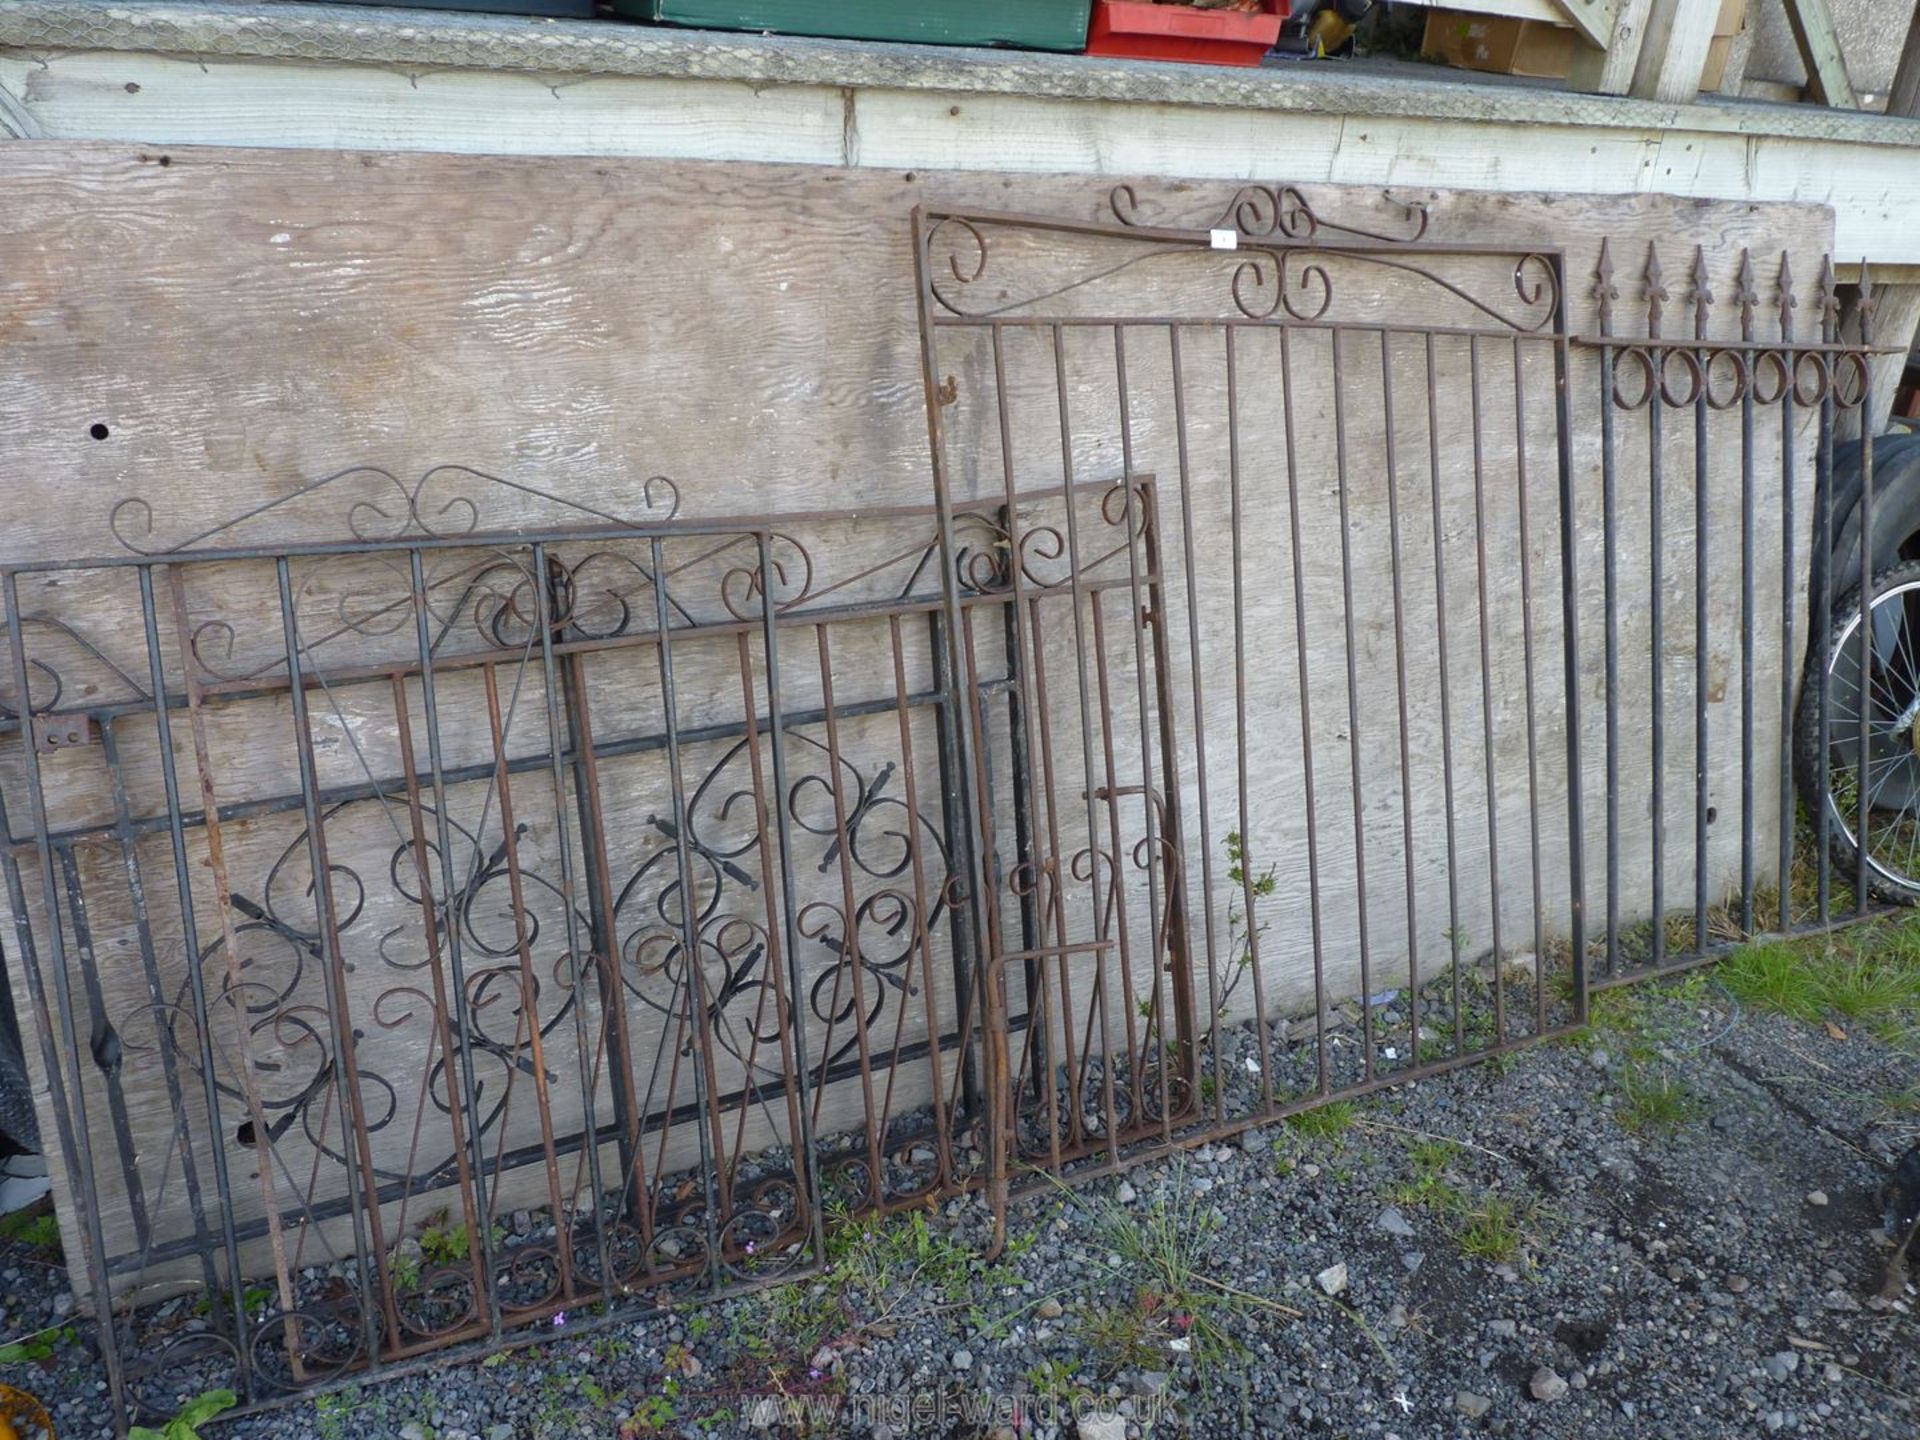 4 Gates and a panel of railings.